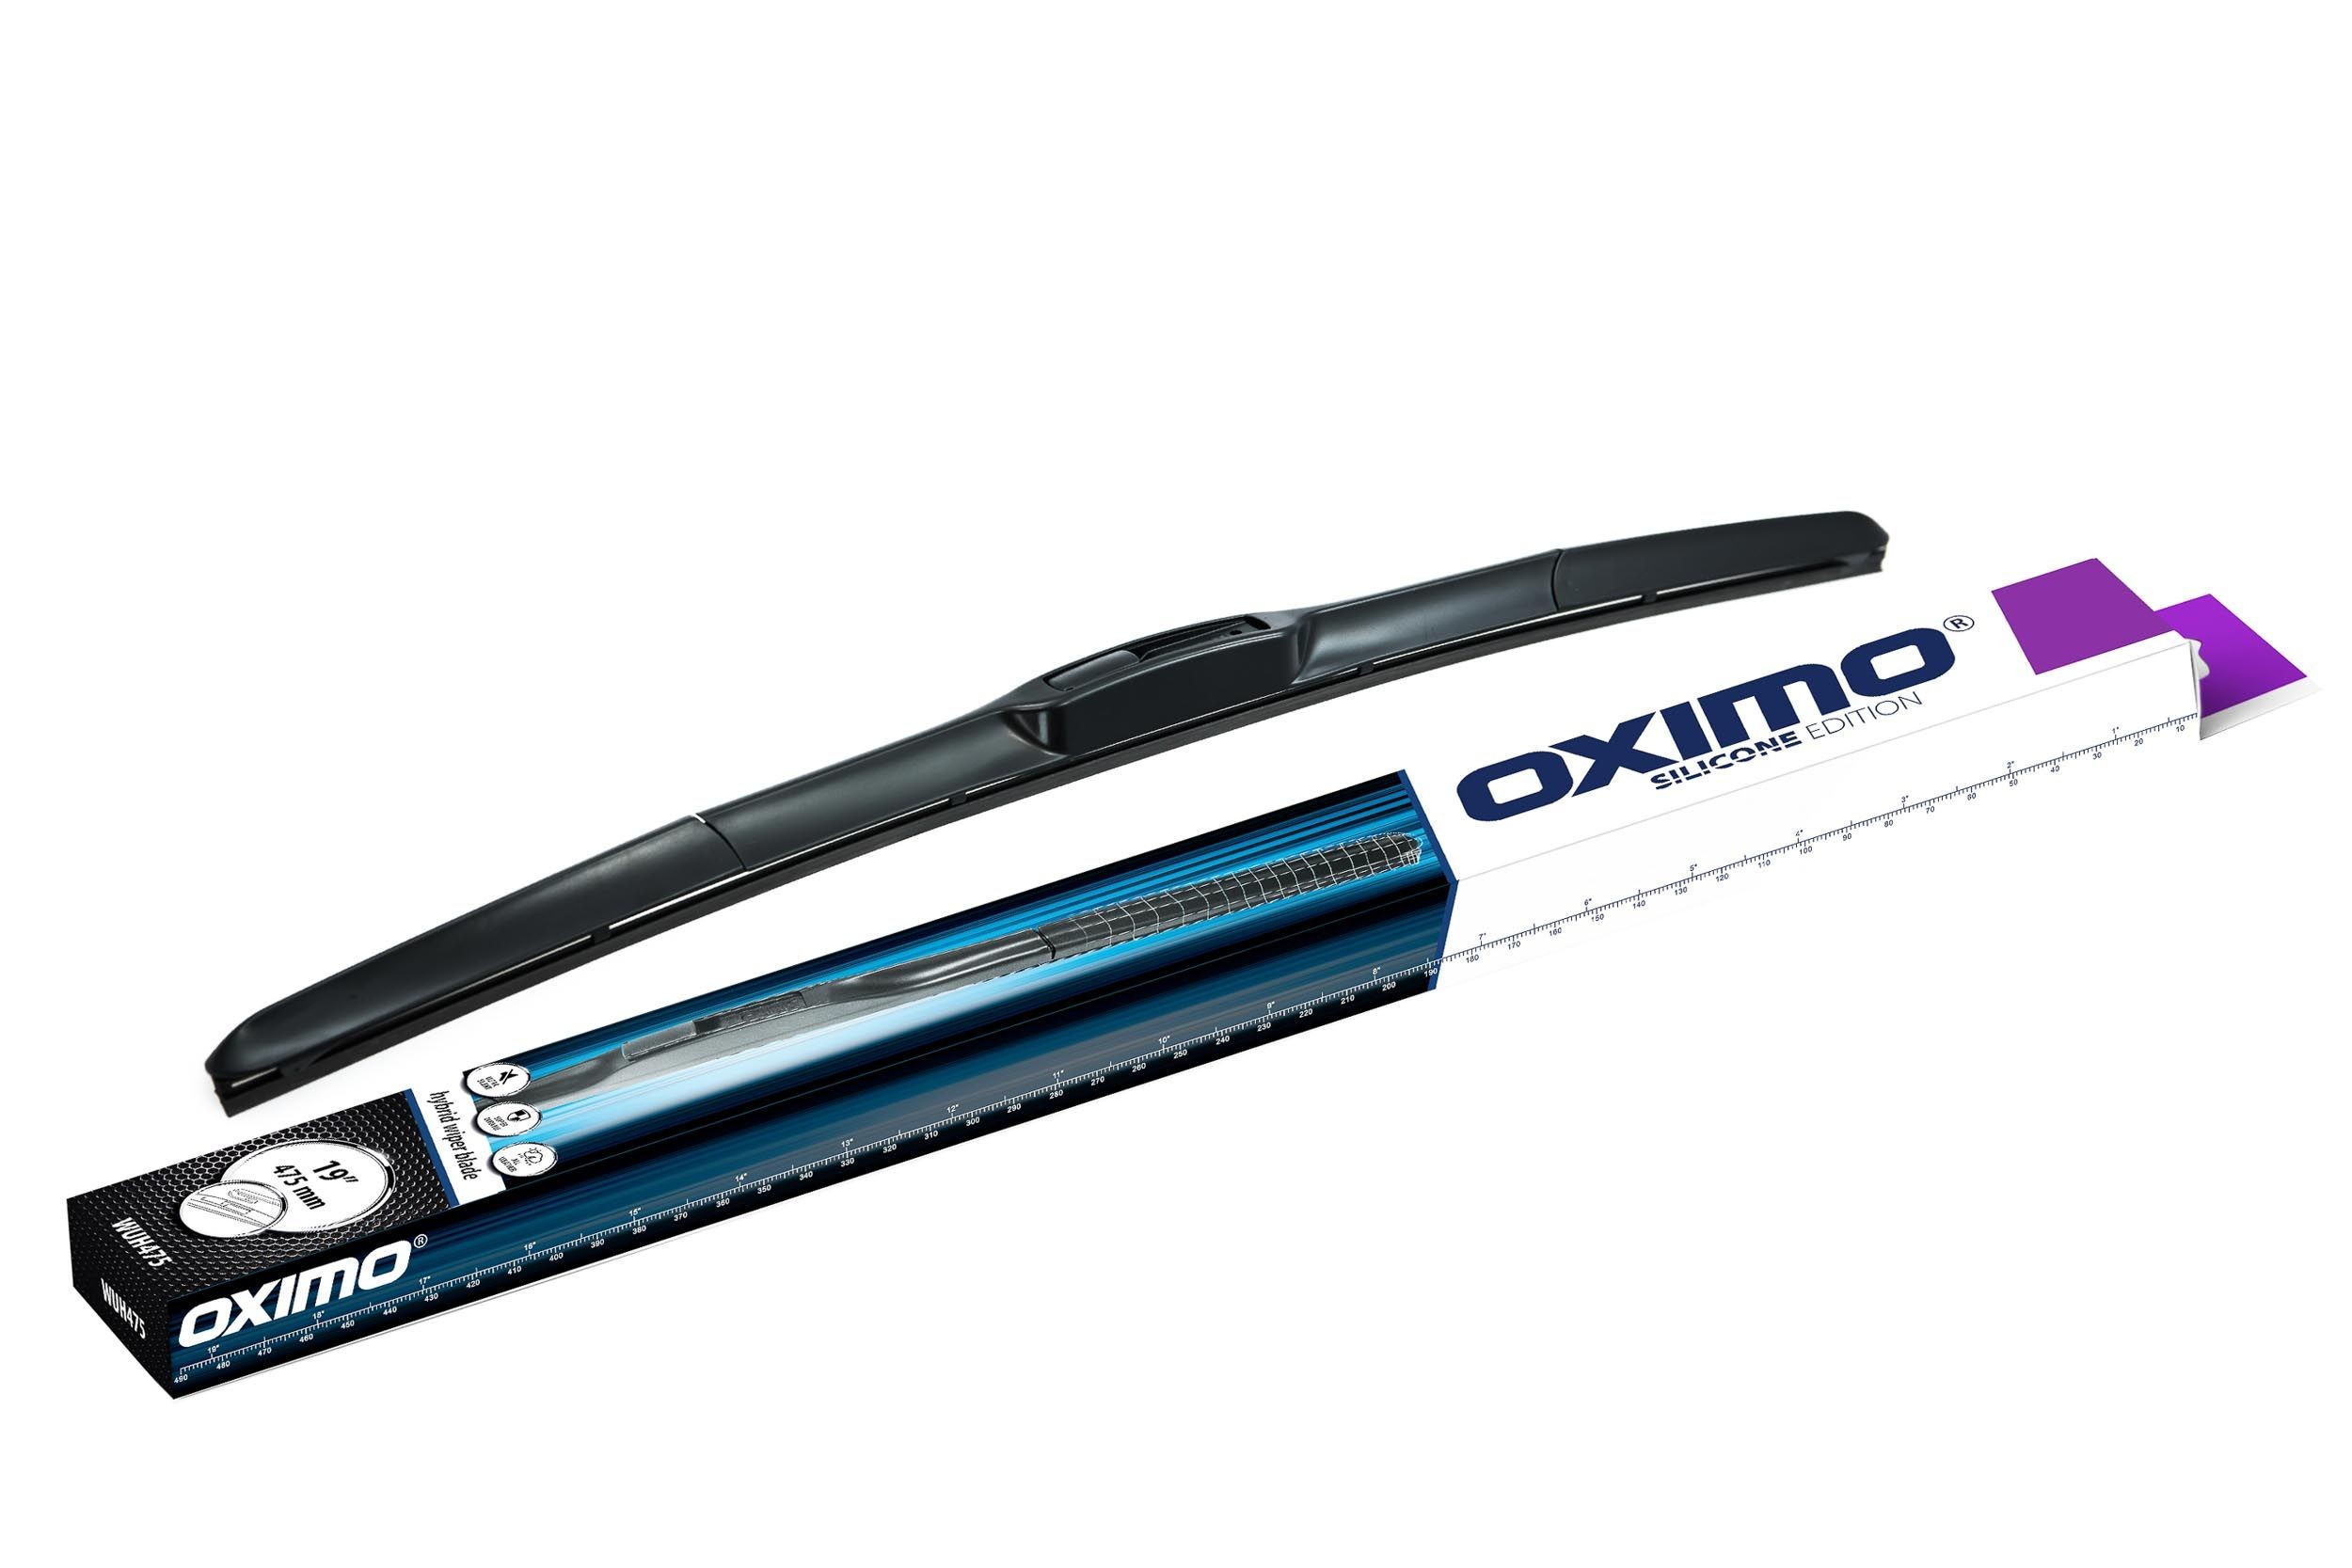 OXIMO WUH475 Wiper blade 475 mm, Hybrid Wiper Blade